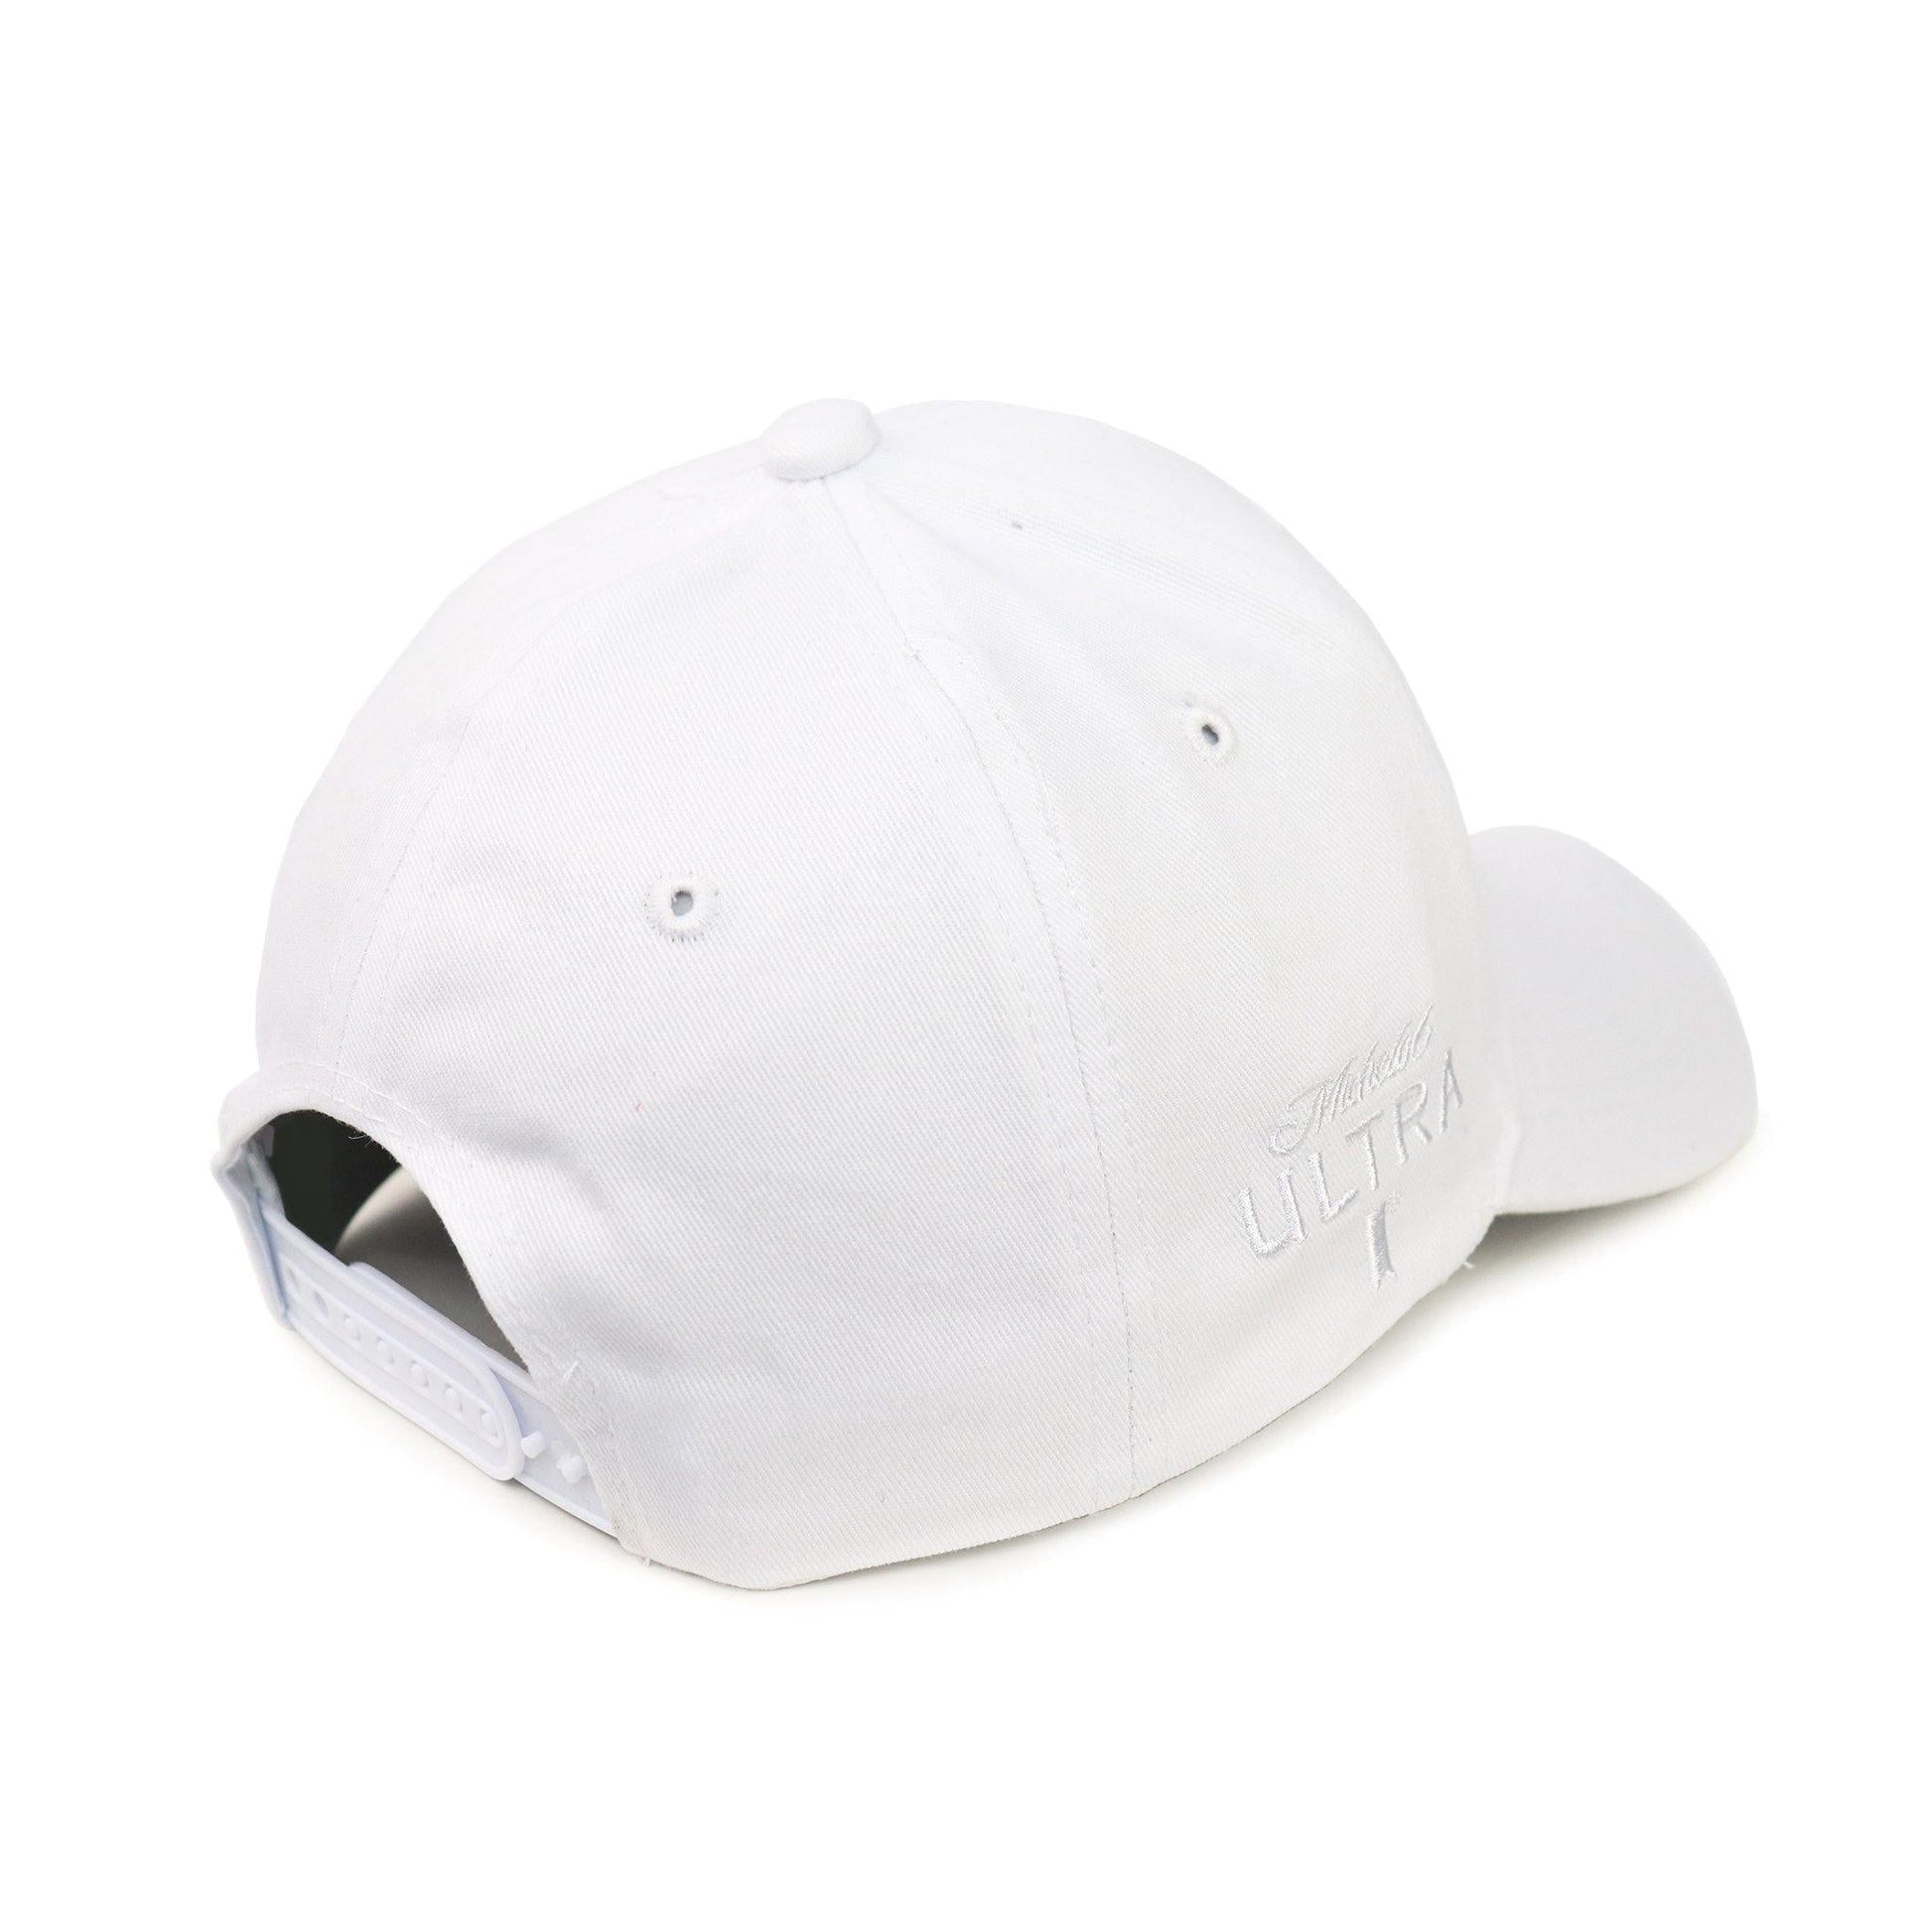 all white hat with michelob ultra logo in white on the right side of hat